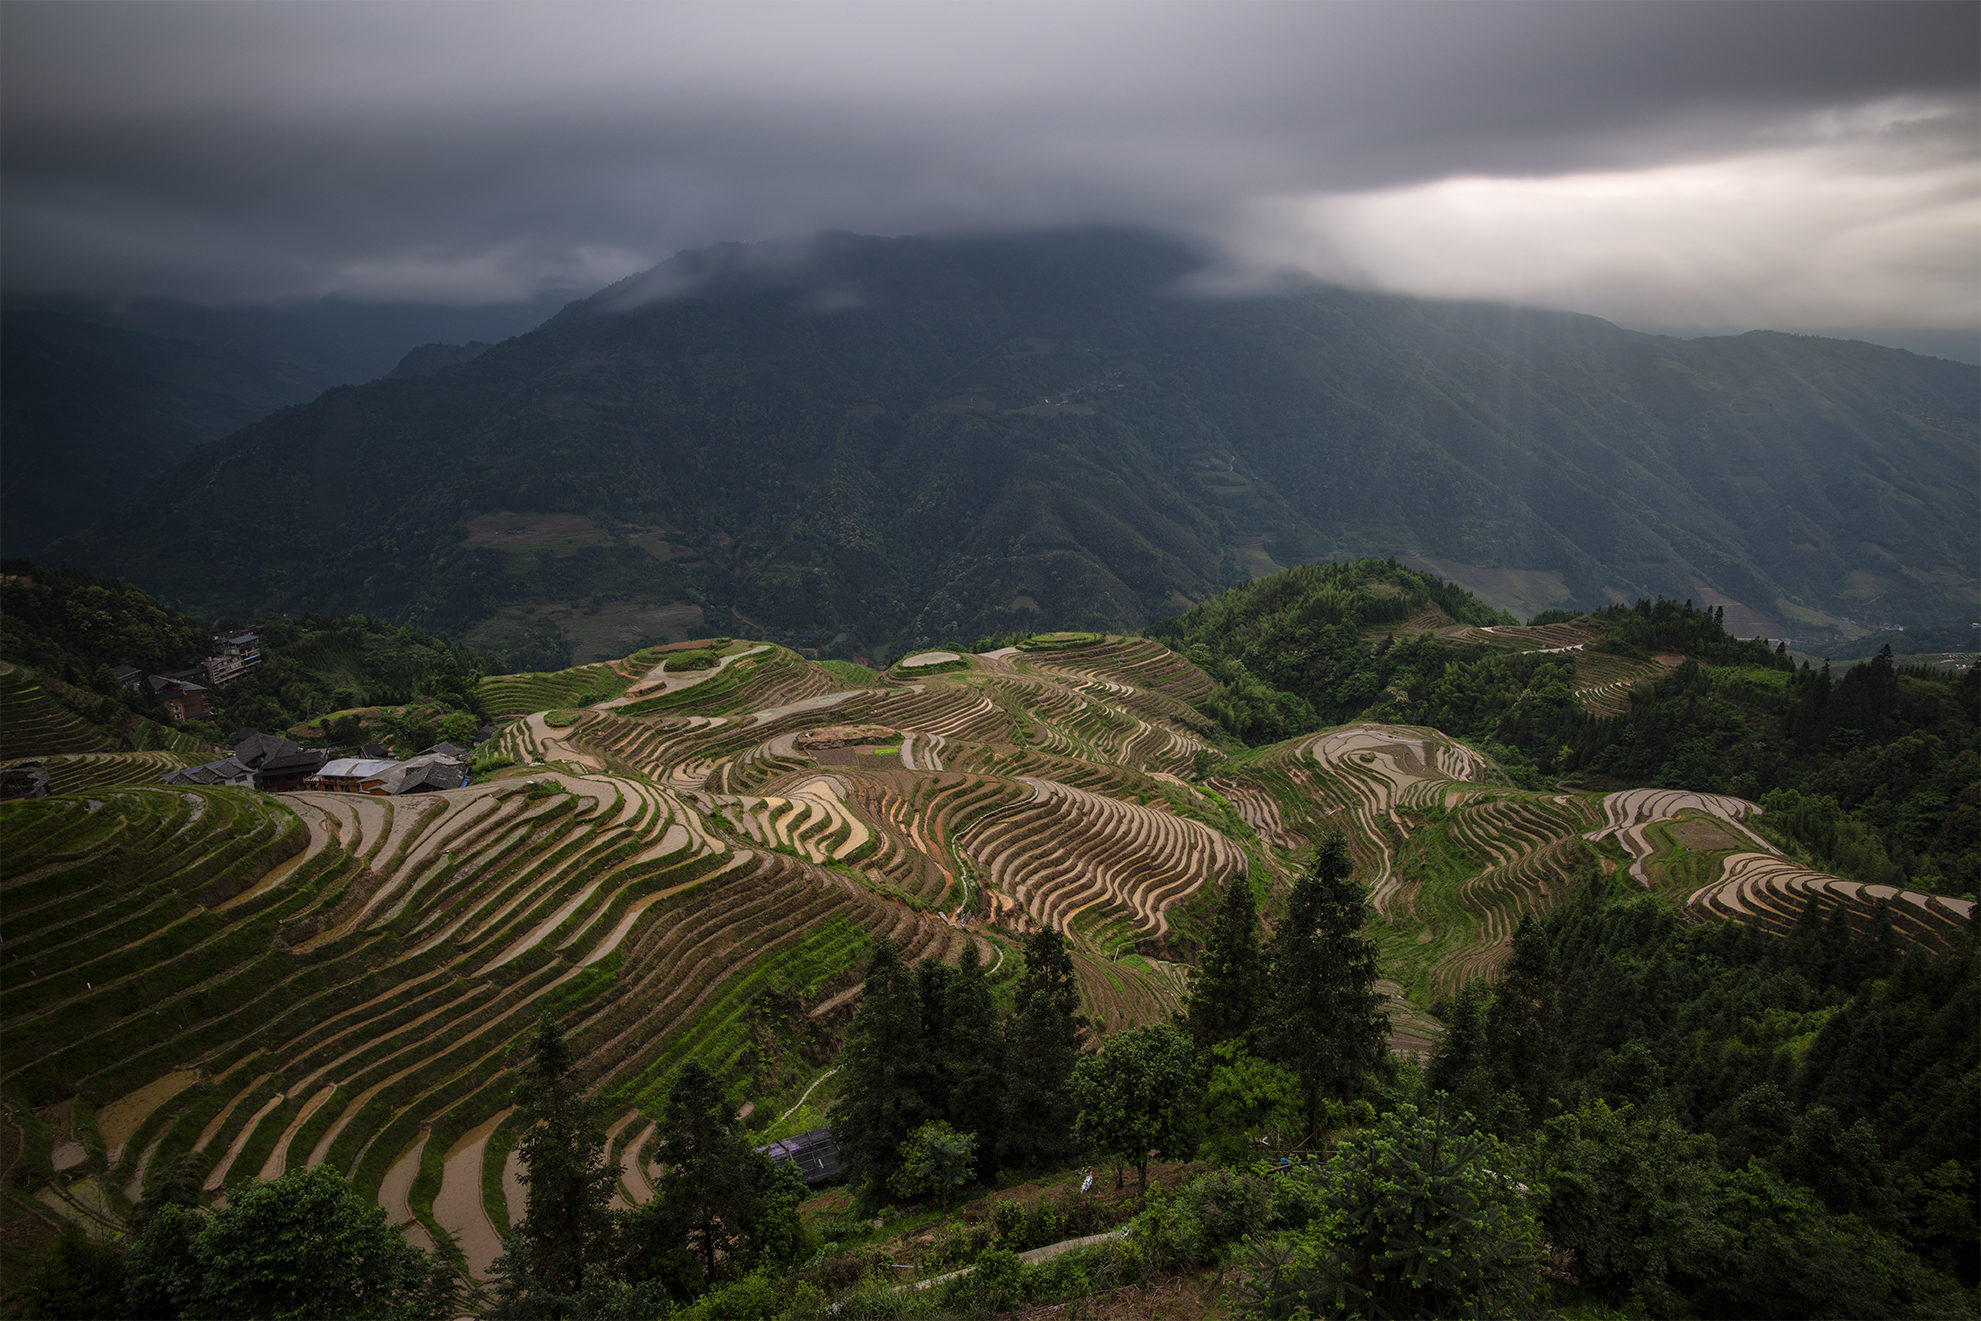 views overlooking the mountain terraces of Seven Stars and Moon in Longji, China